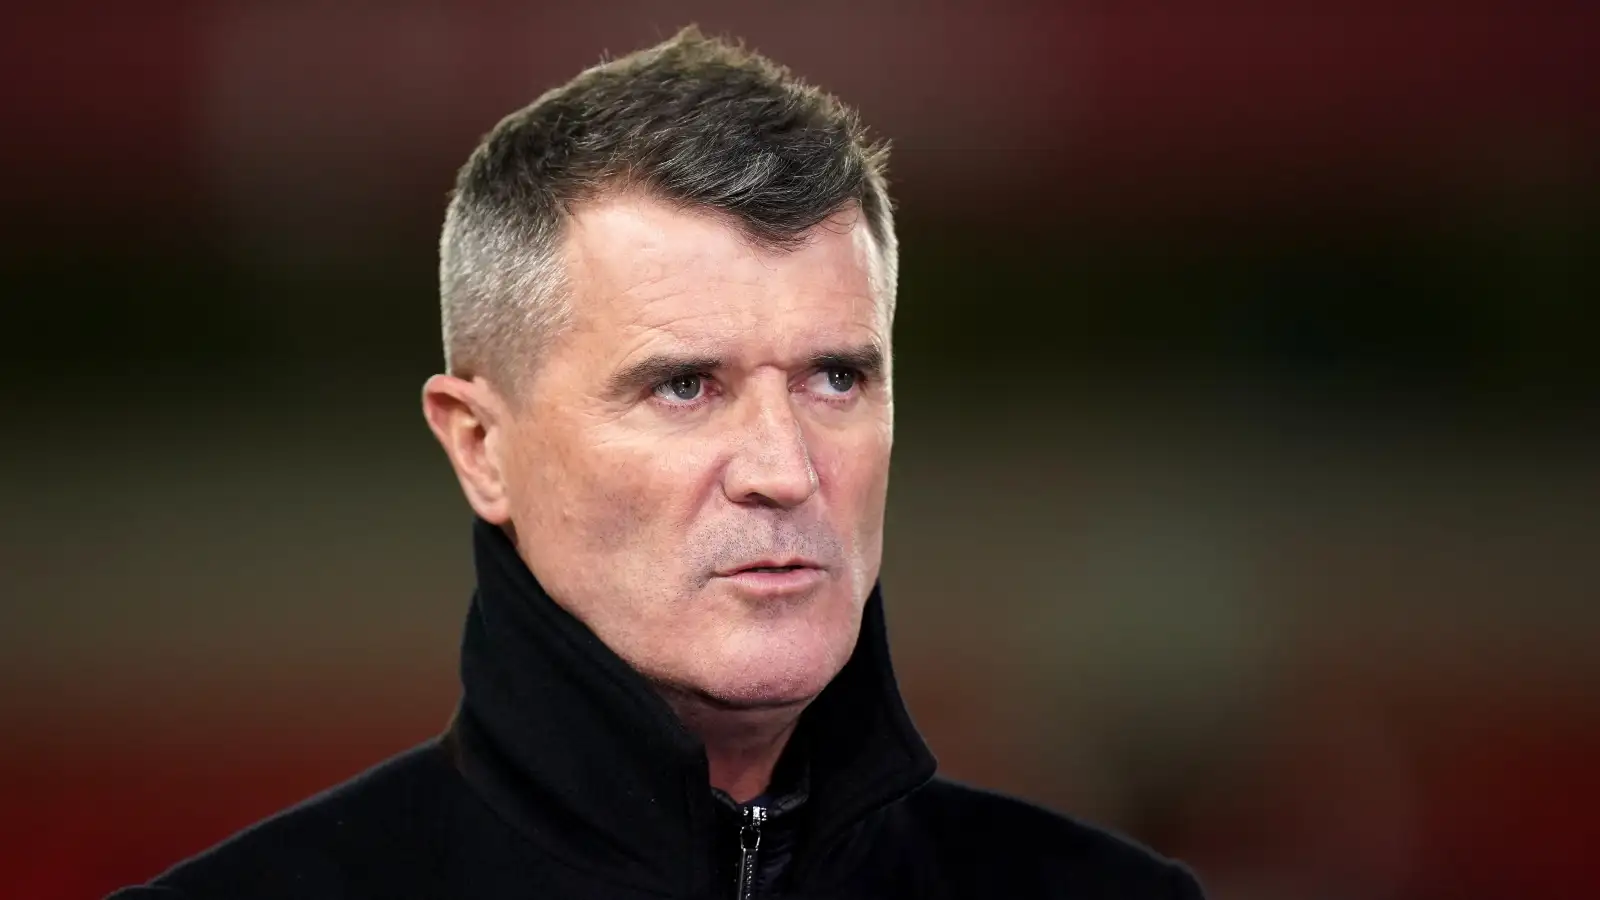 Roy Keane delivered an irresistible two-footer to Arsenal’s title hopes